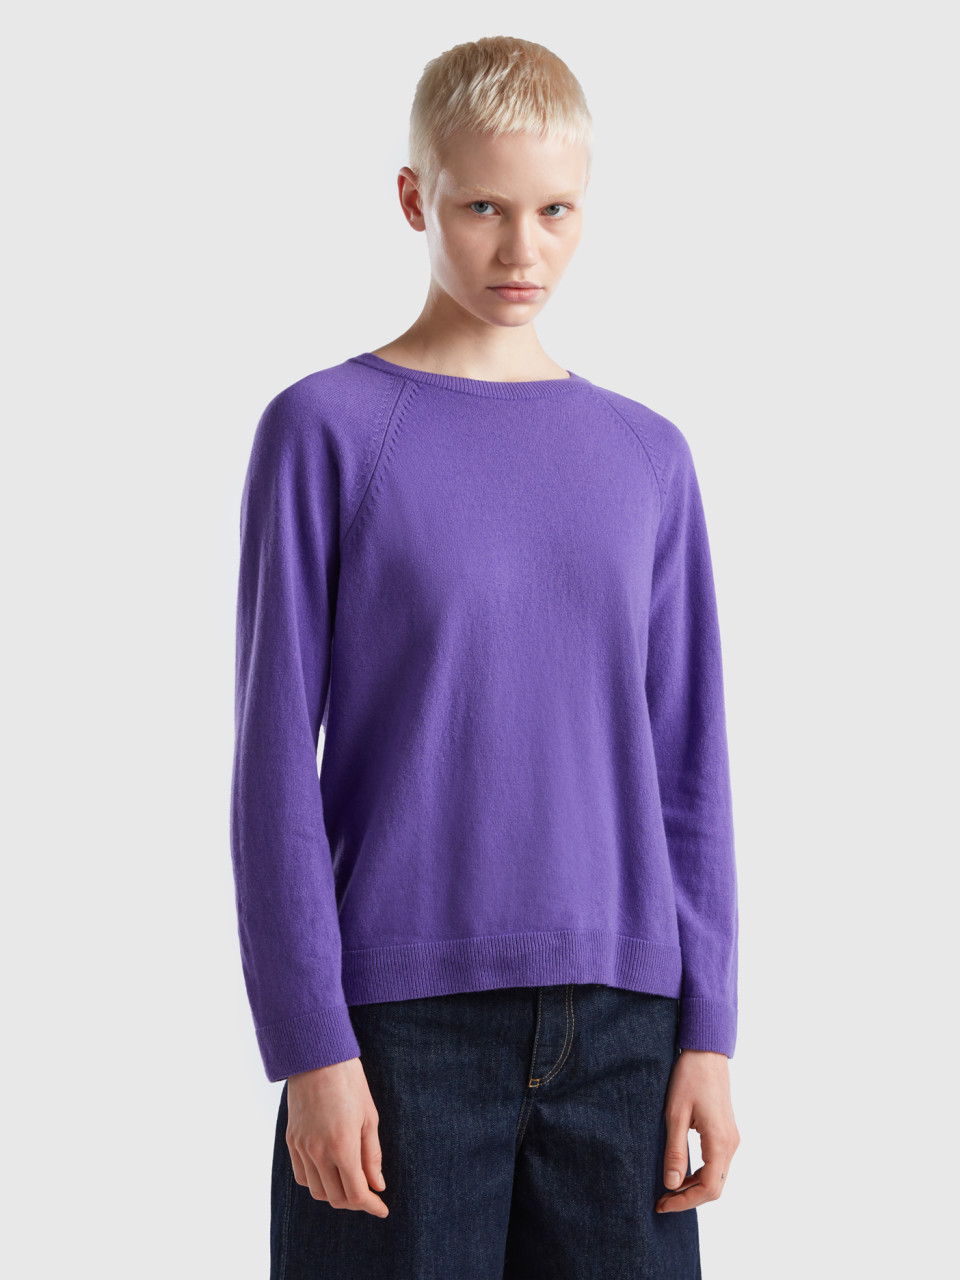 Benetton, Purple Crew Neck Sweater In Cashmere And Wool Blend, Violet, Women